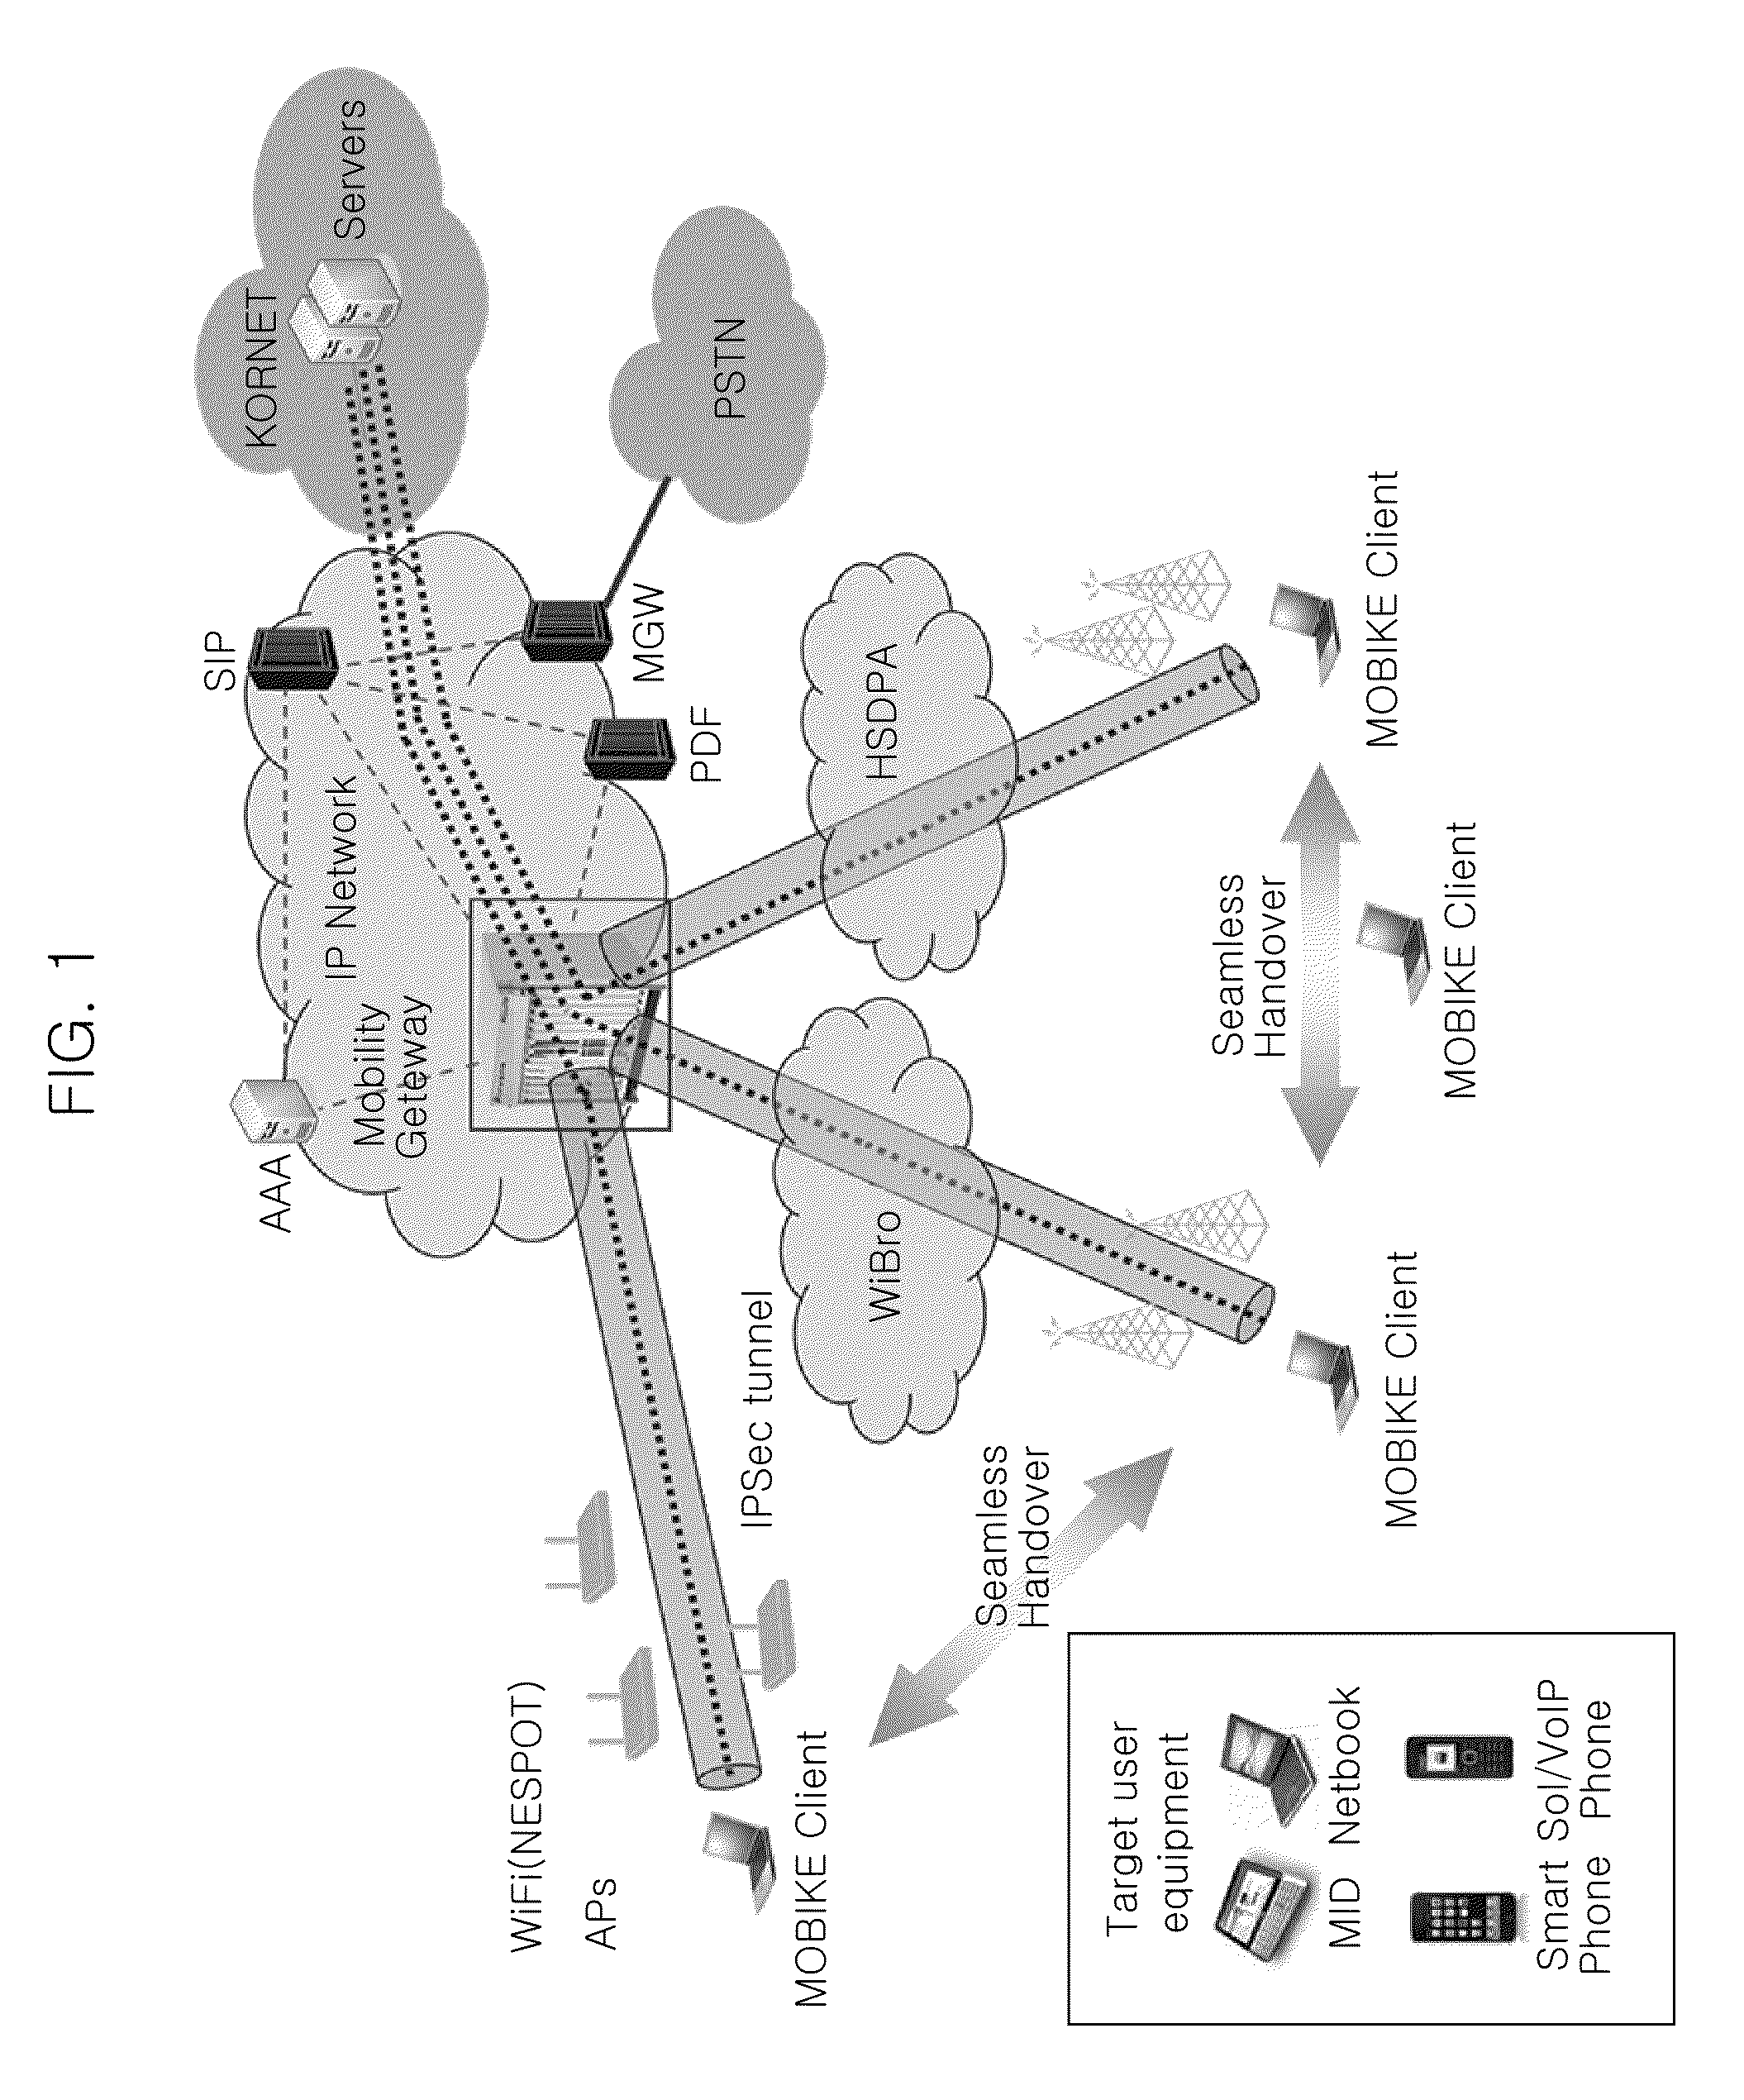 Client apparatus for supporting mobility and security between heterogeneous networks using mobike protocol